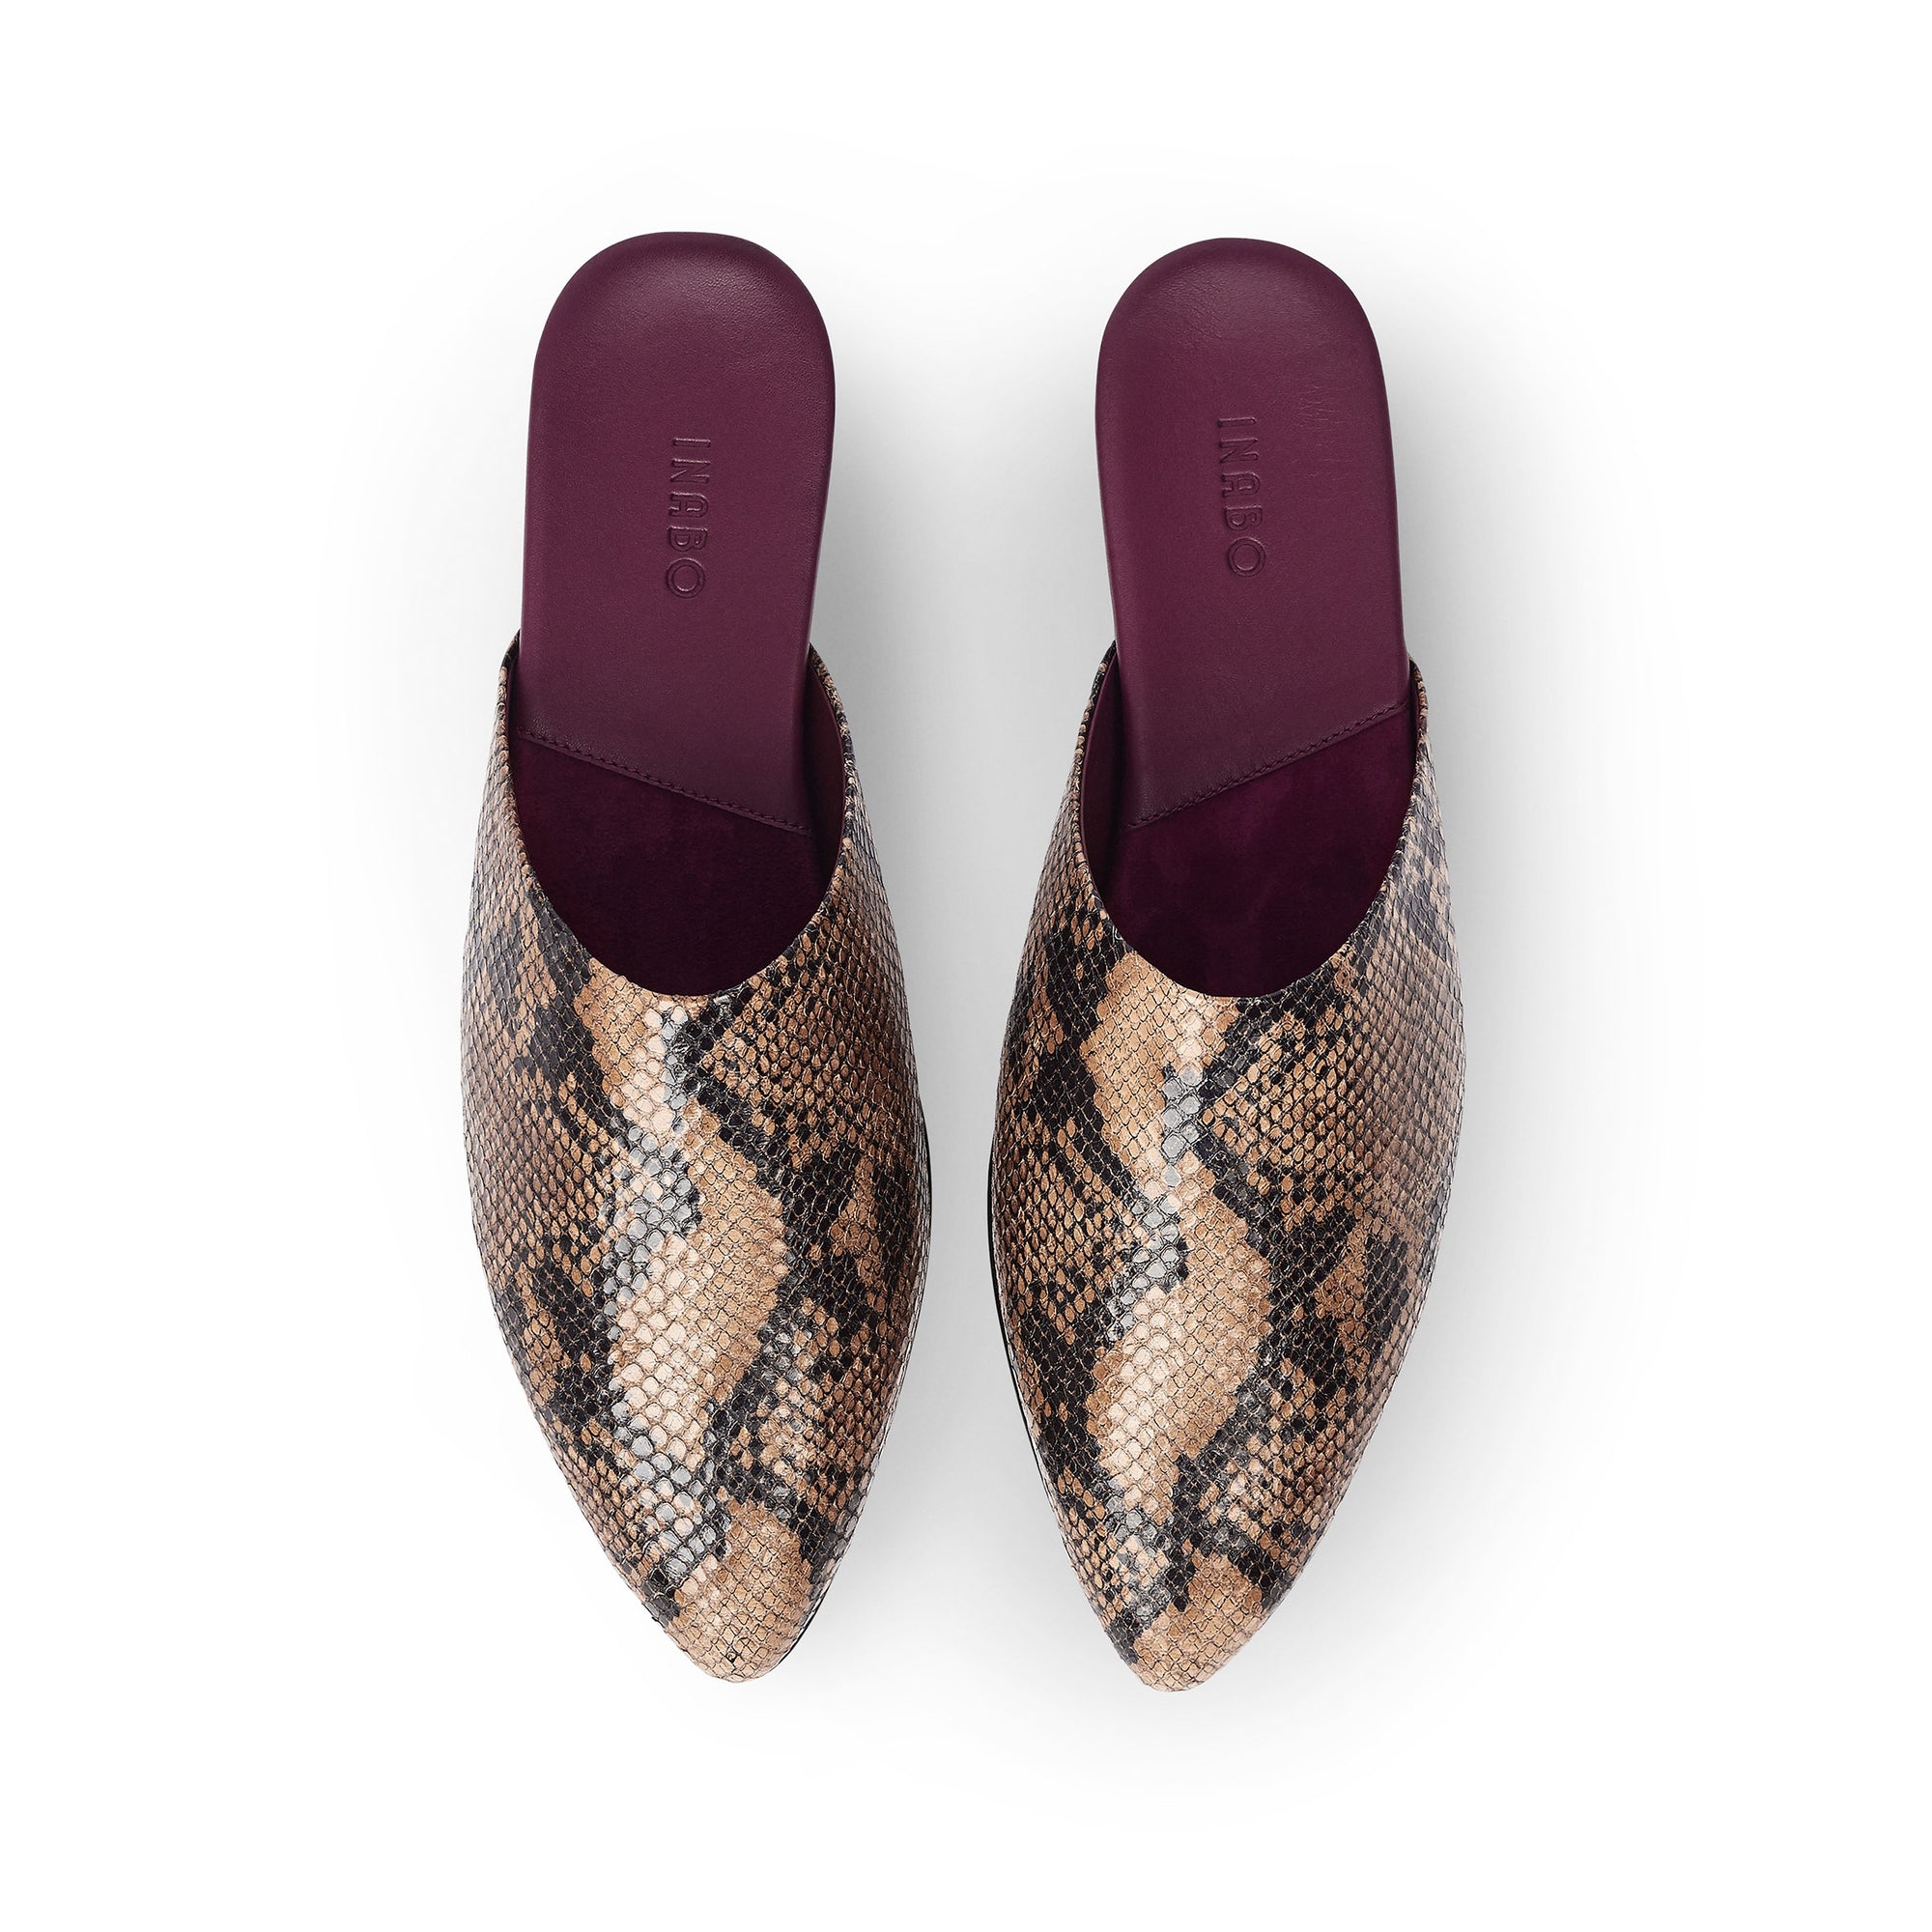 Inabo Women's Slider Slipper in Nougat Snake leather and burgundy leather insole shown from above